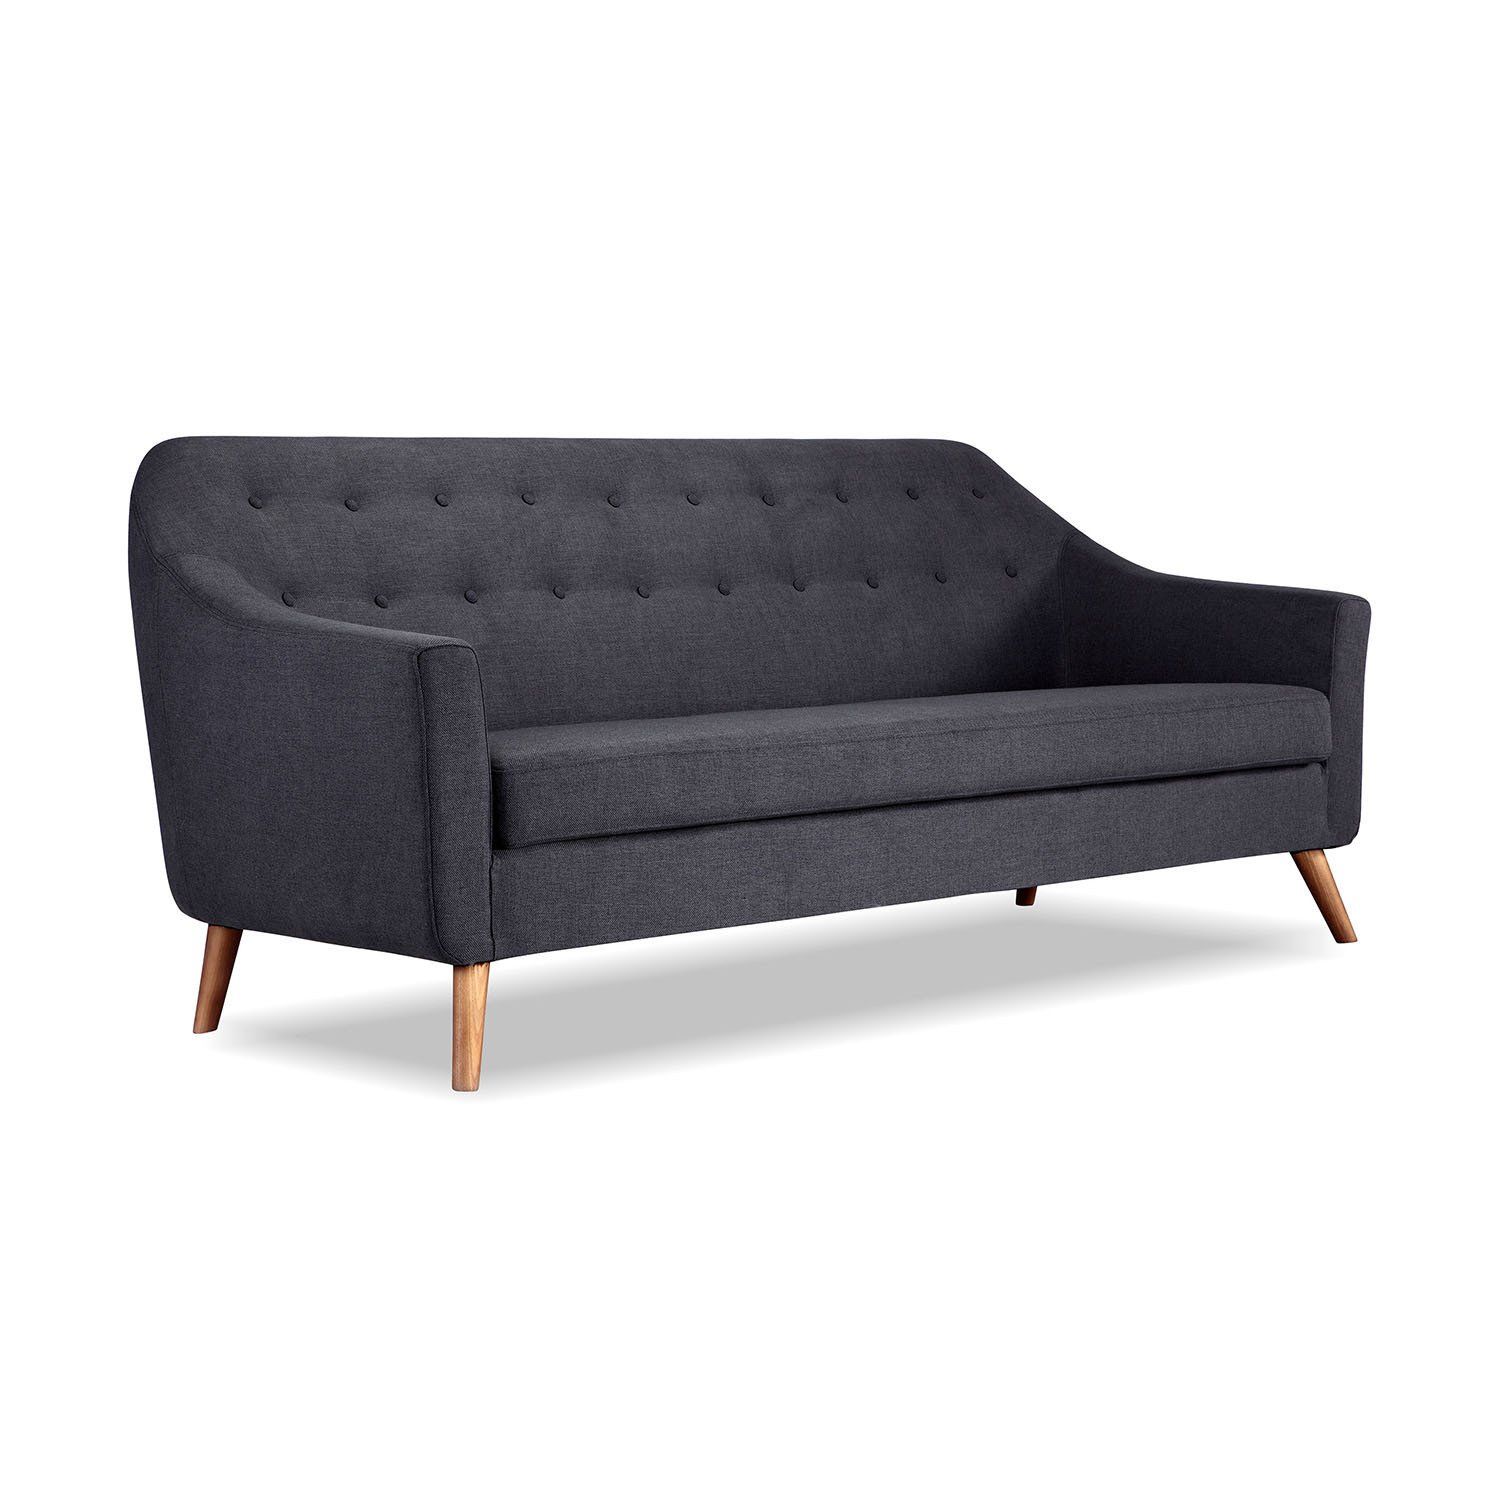 Shop Cameron Mid Century Modern Urban Ink Twill Classic English Sofa For Cameron Sofa Chairs (View 16 of 20)